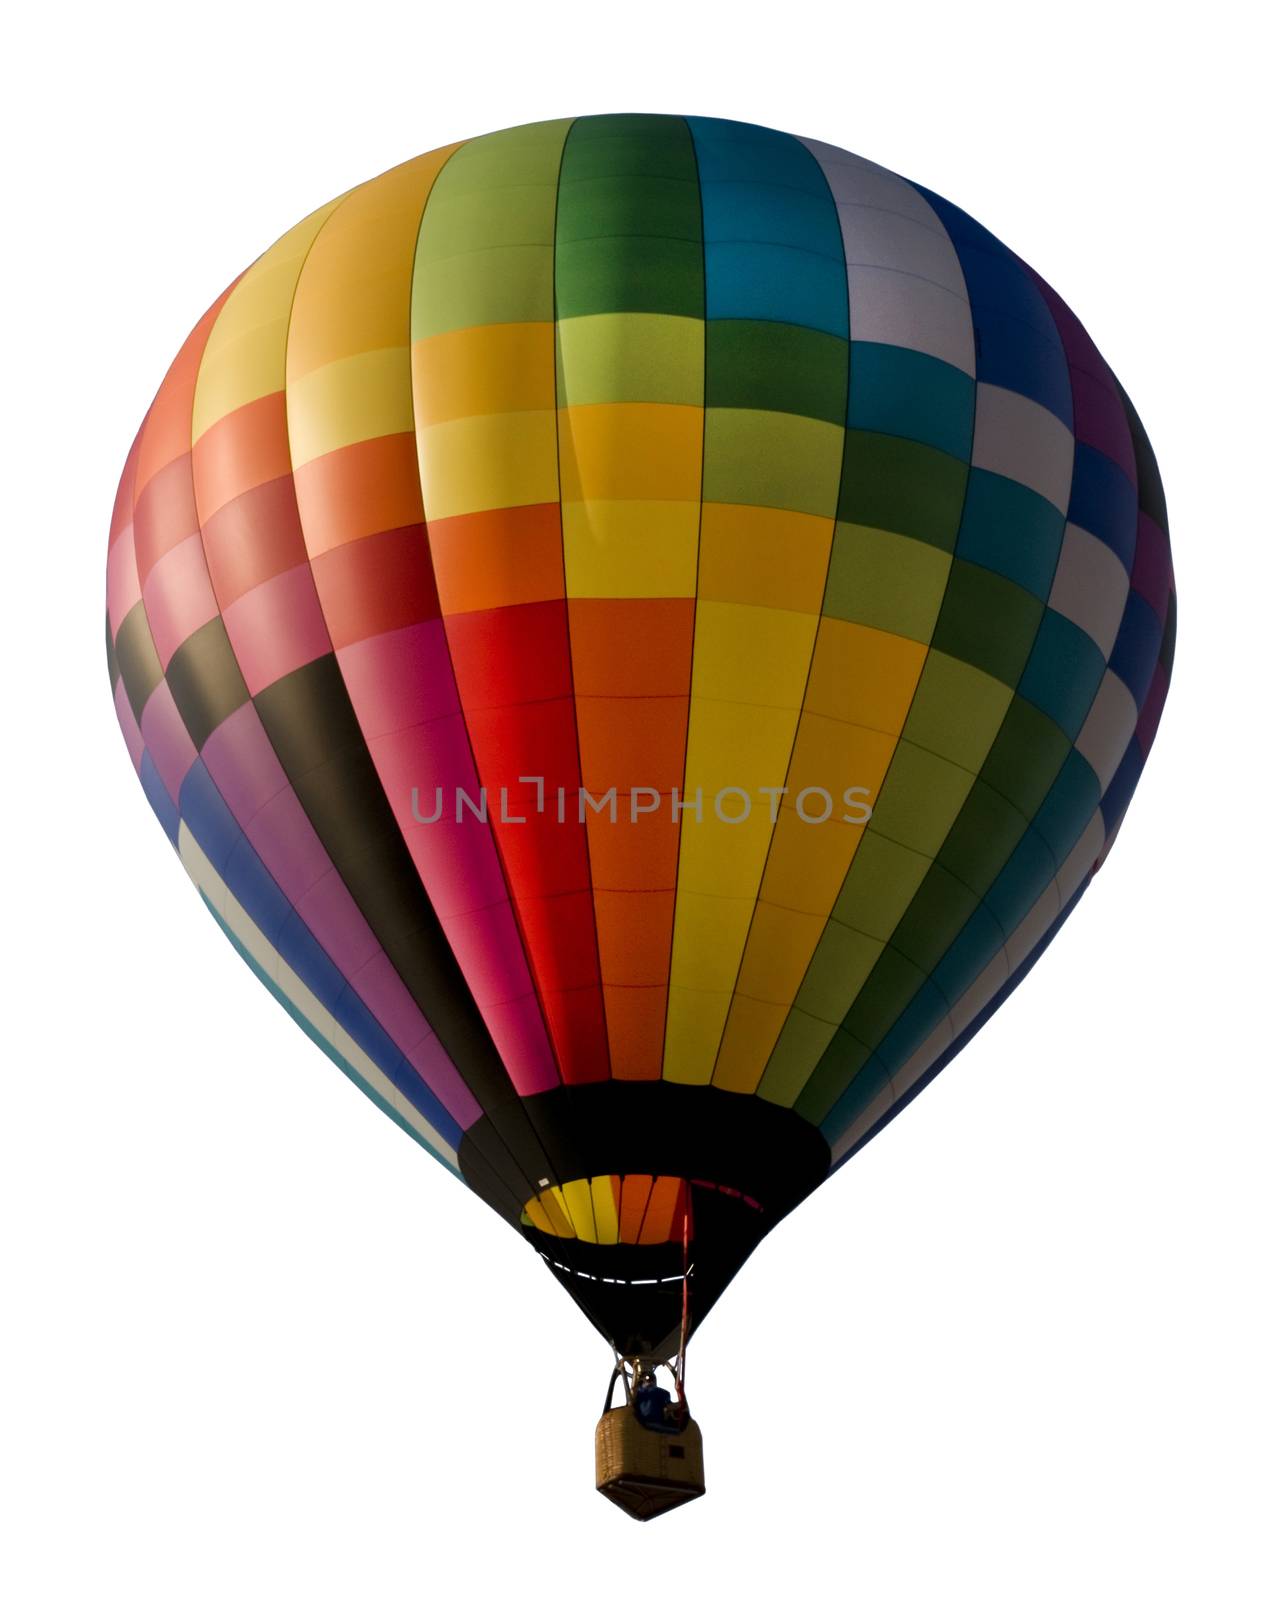 Colorful hot air balloon isolated against a white background